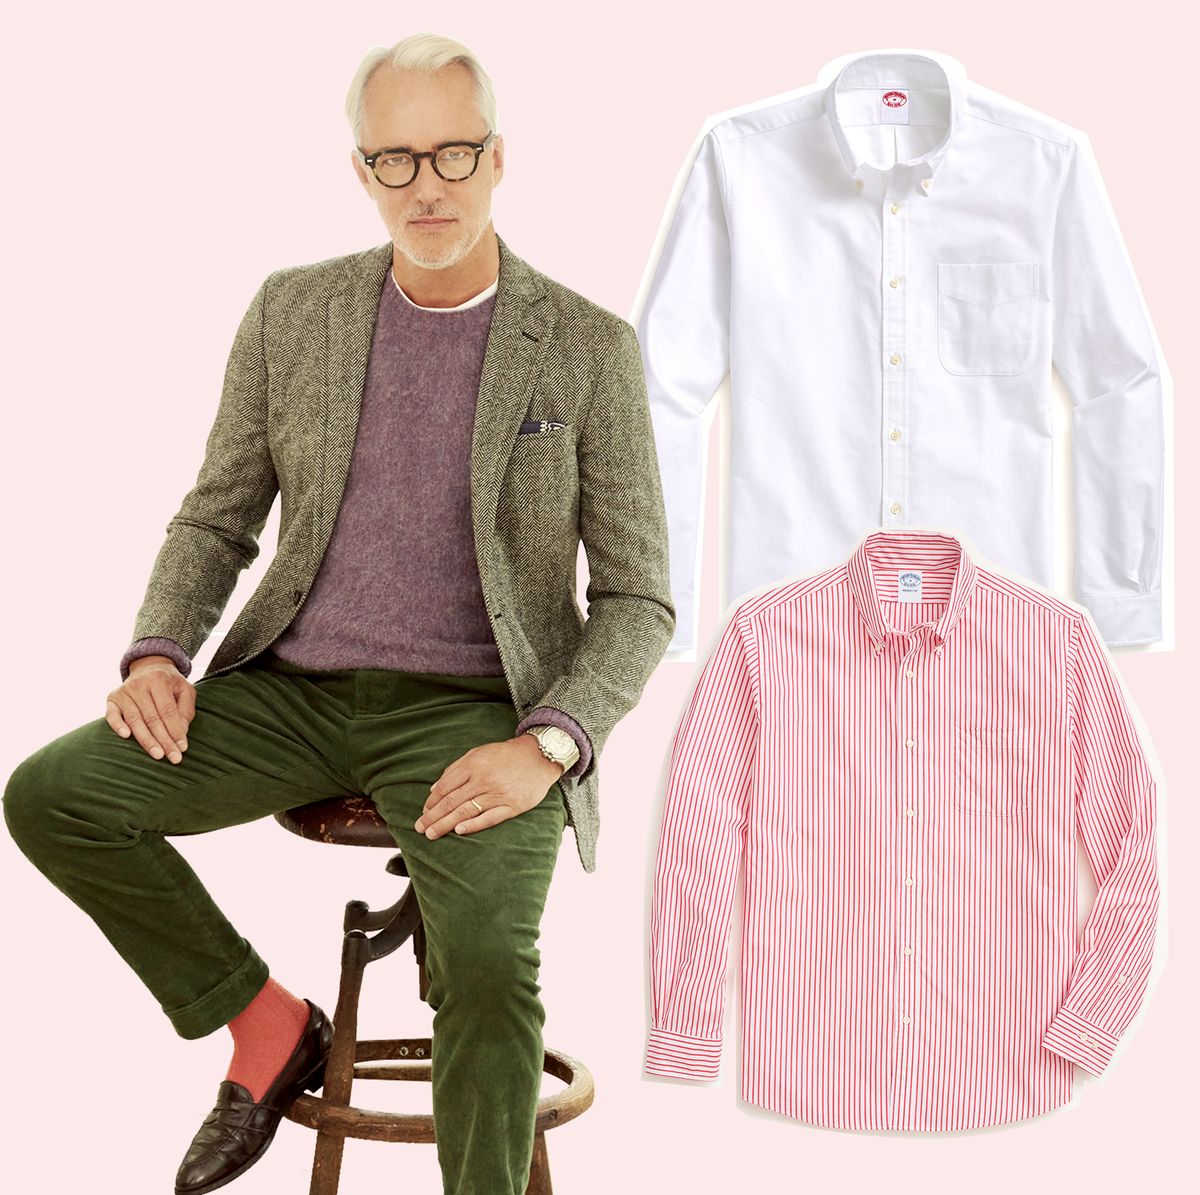 Brooks Brothers Spring 2020 Ready-to-Wear Collection